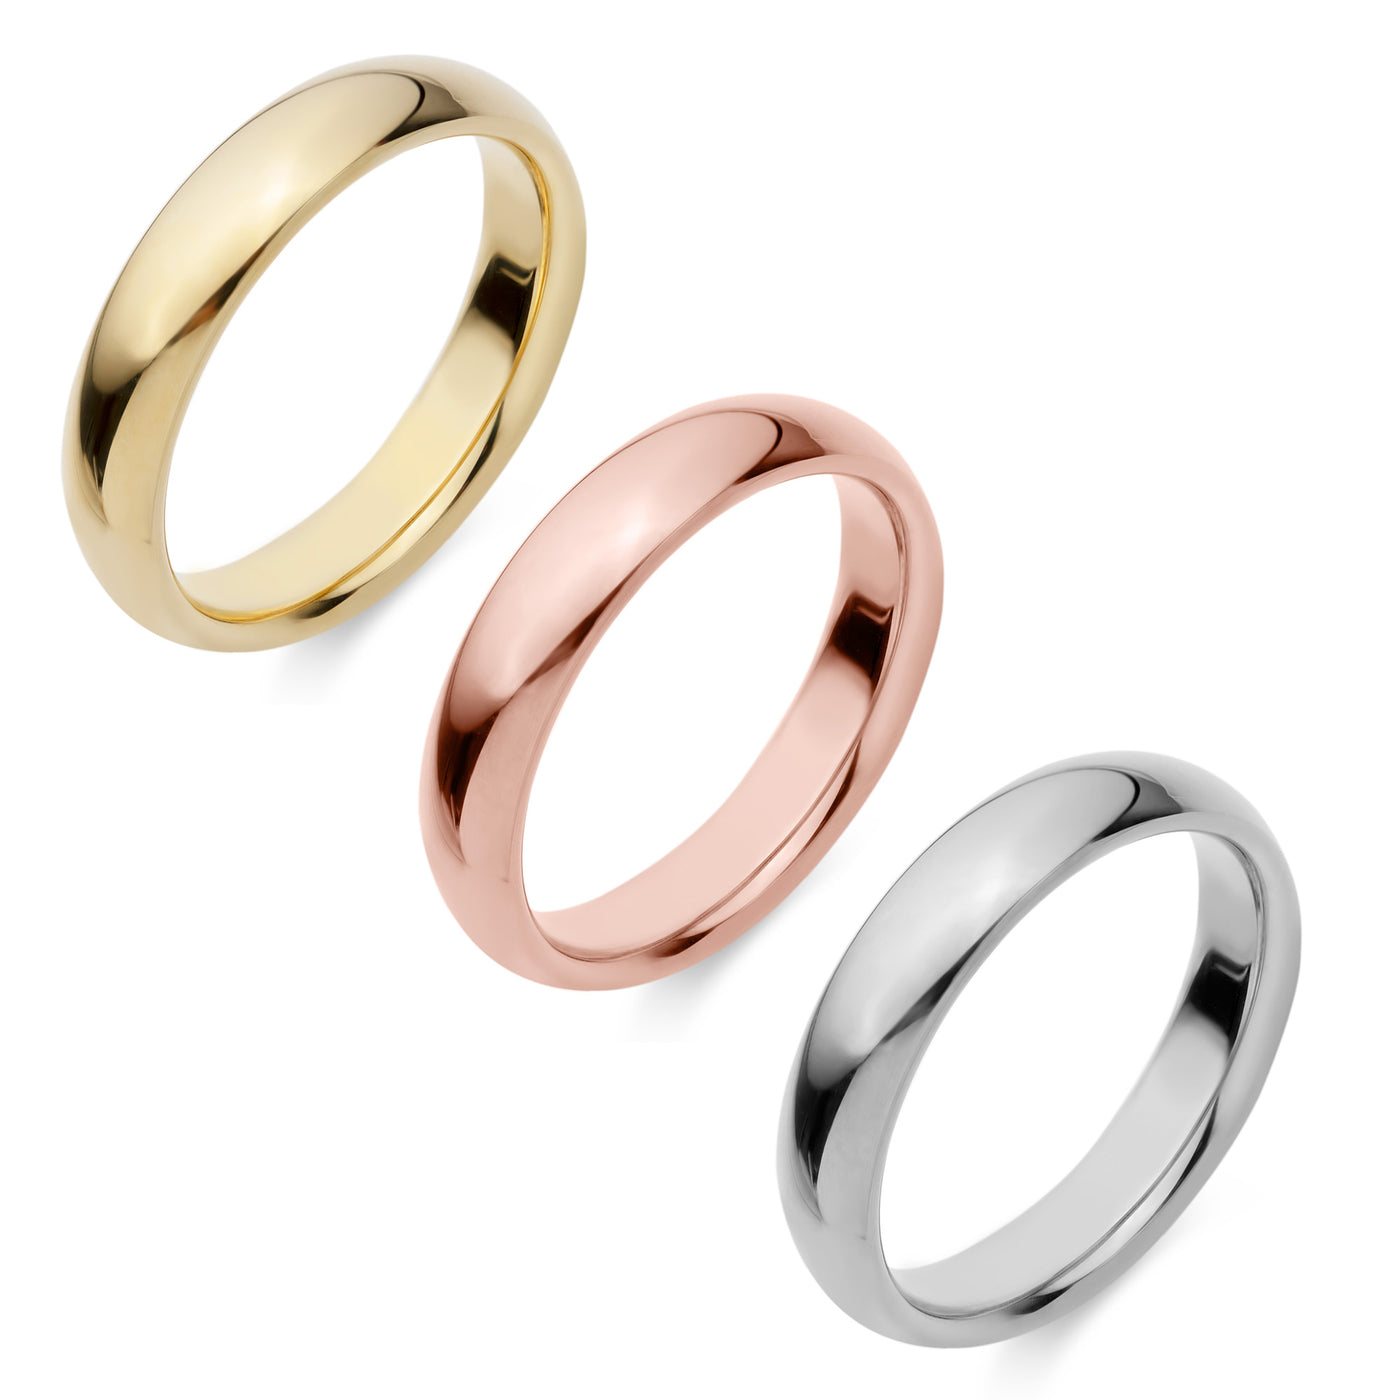 Classic Comfort Fit Wedding Band Gold - Solid